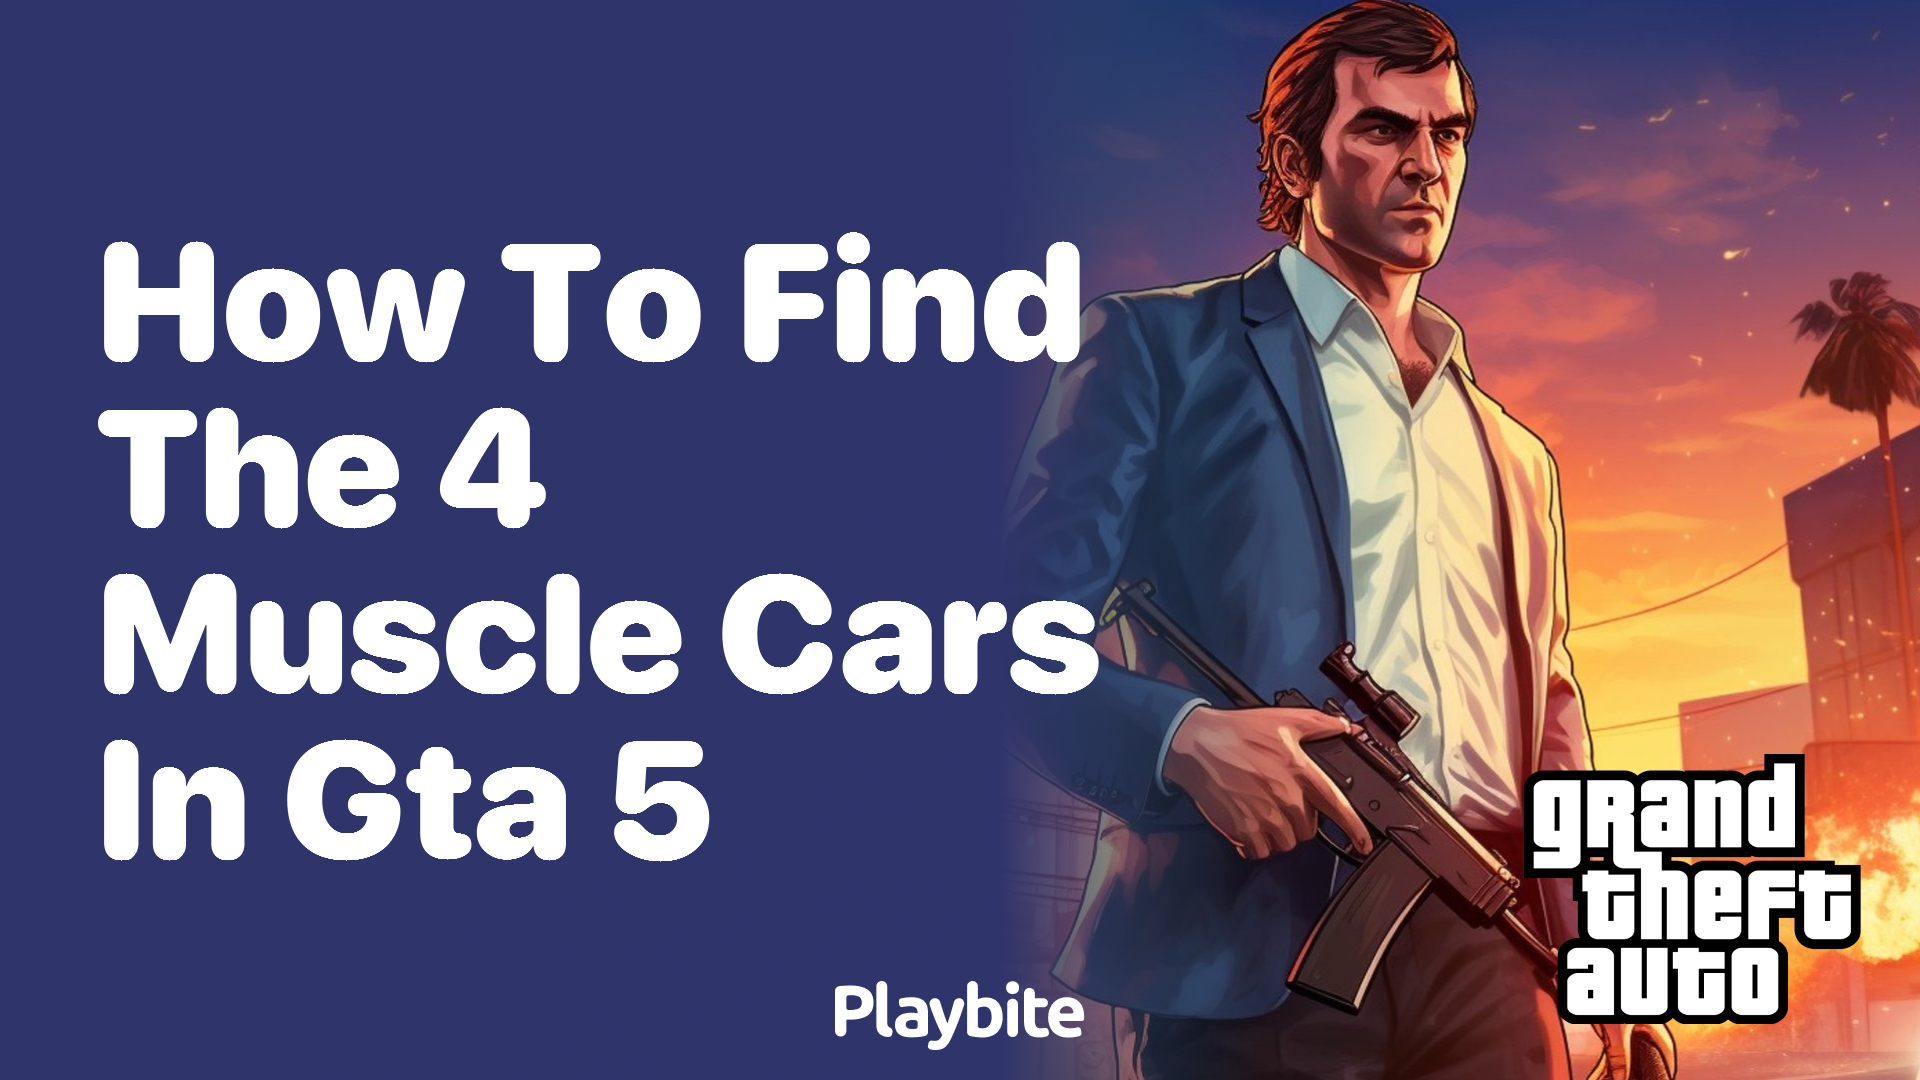 How to find the 4 muscle cars in GTA 5